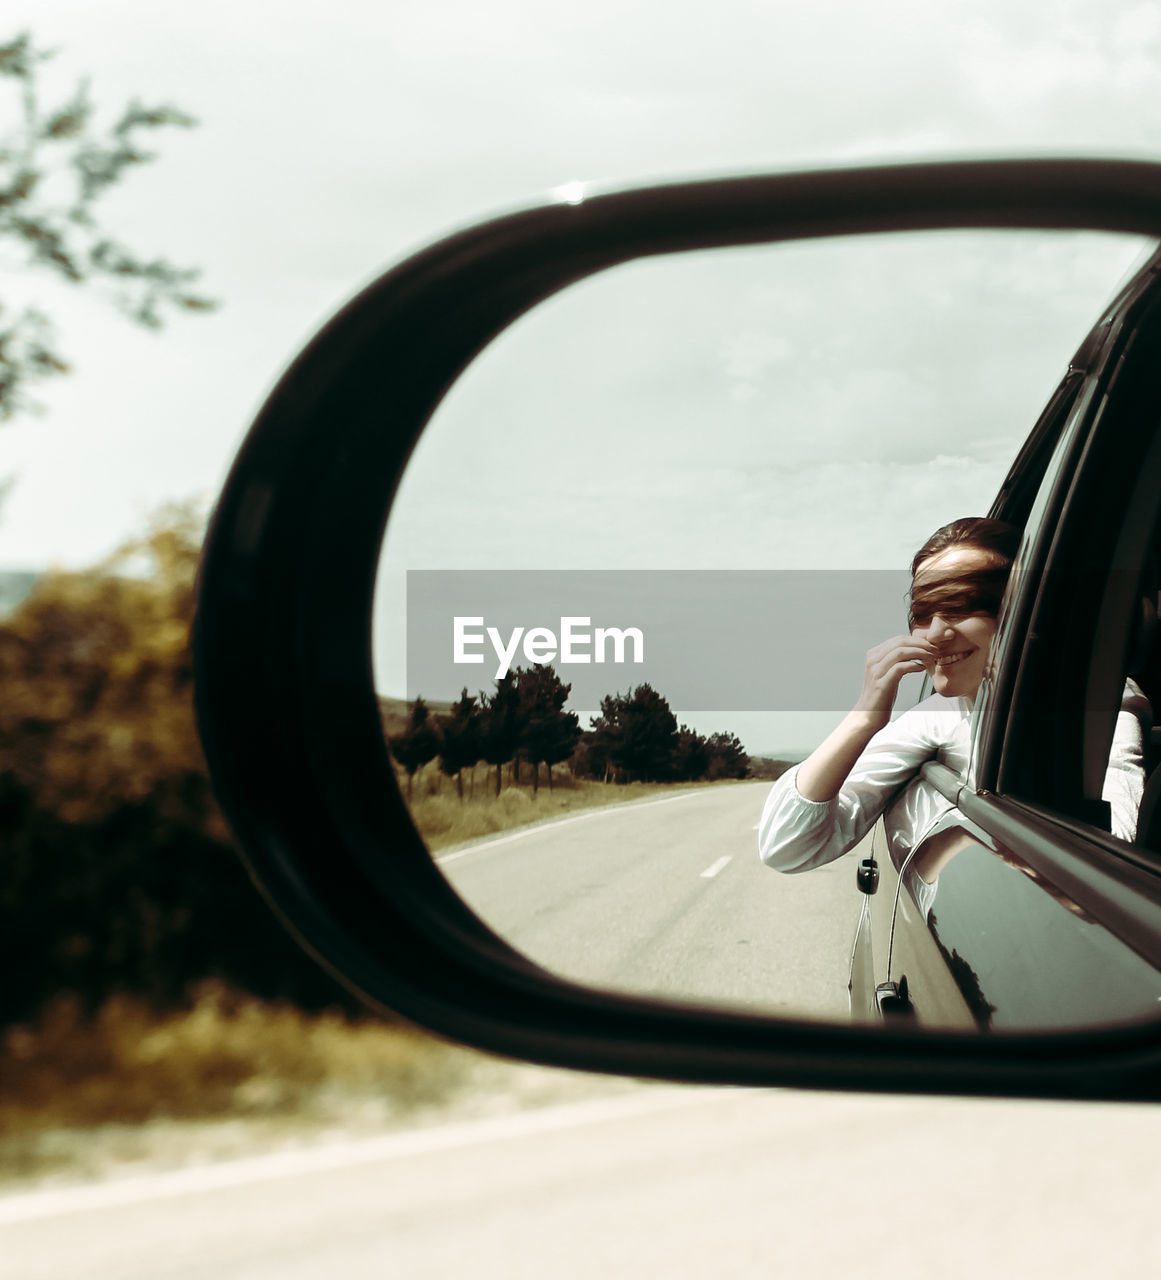 Reflection of woman in side-view mirror